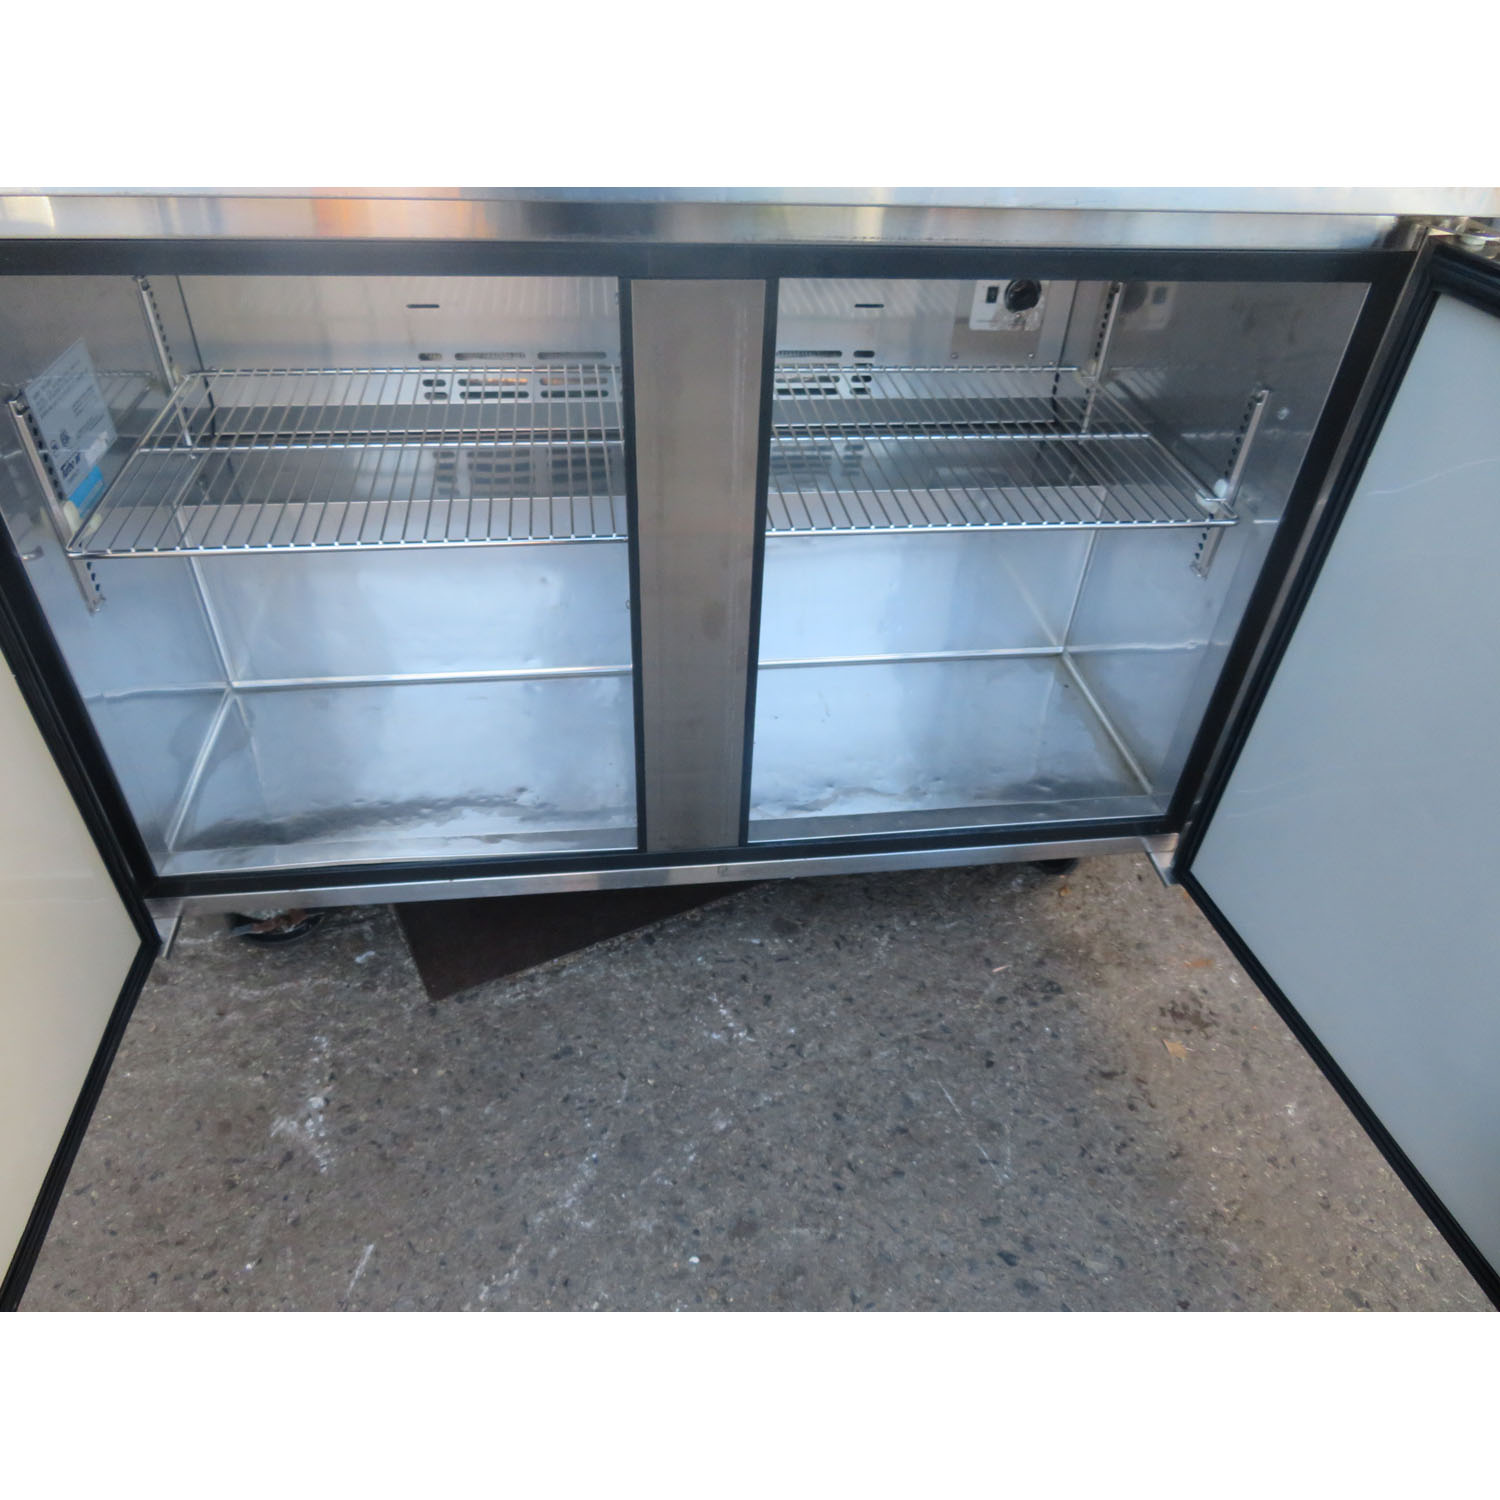 Turbo Air TUR-48SD Lowboy Refrigerator, Used Excellent Condition image 1